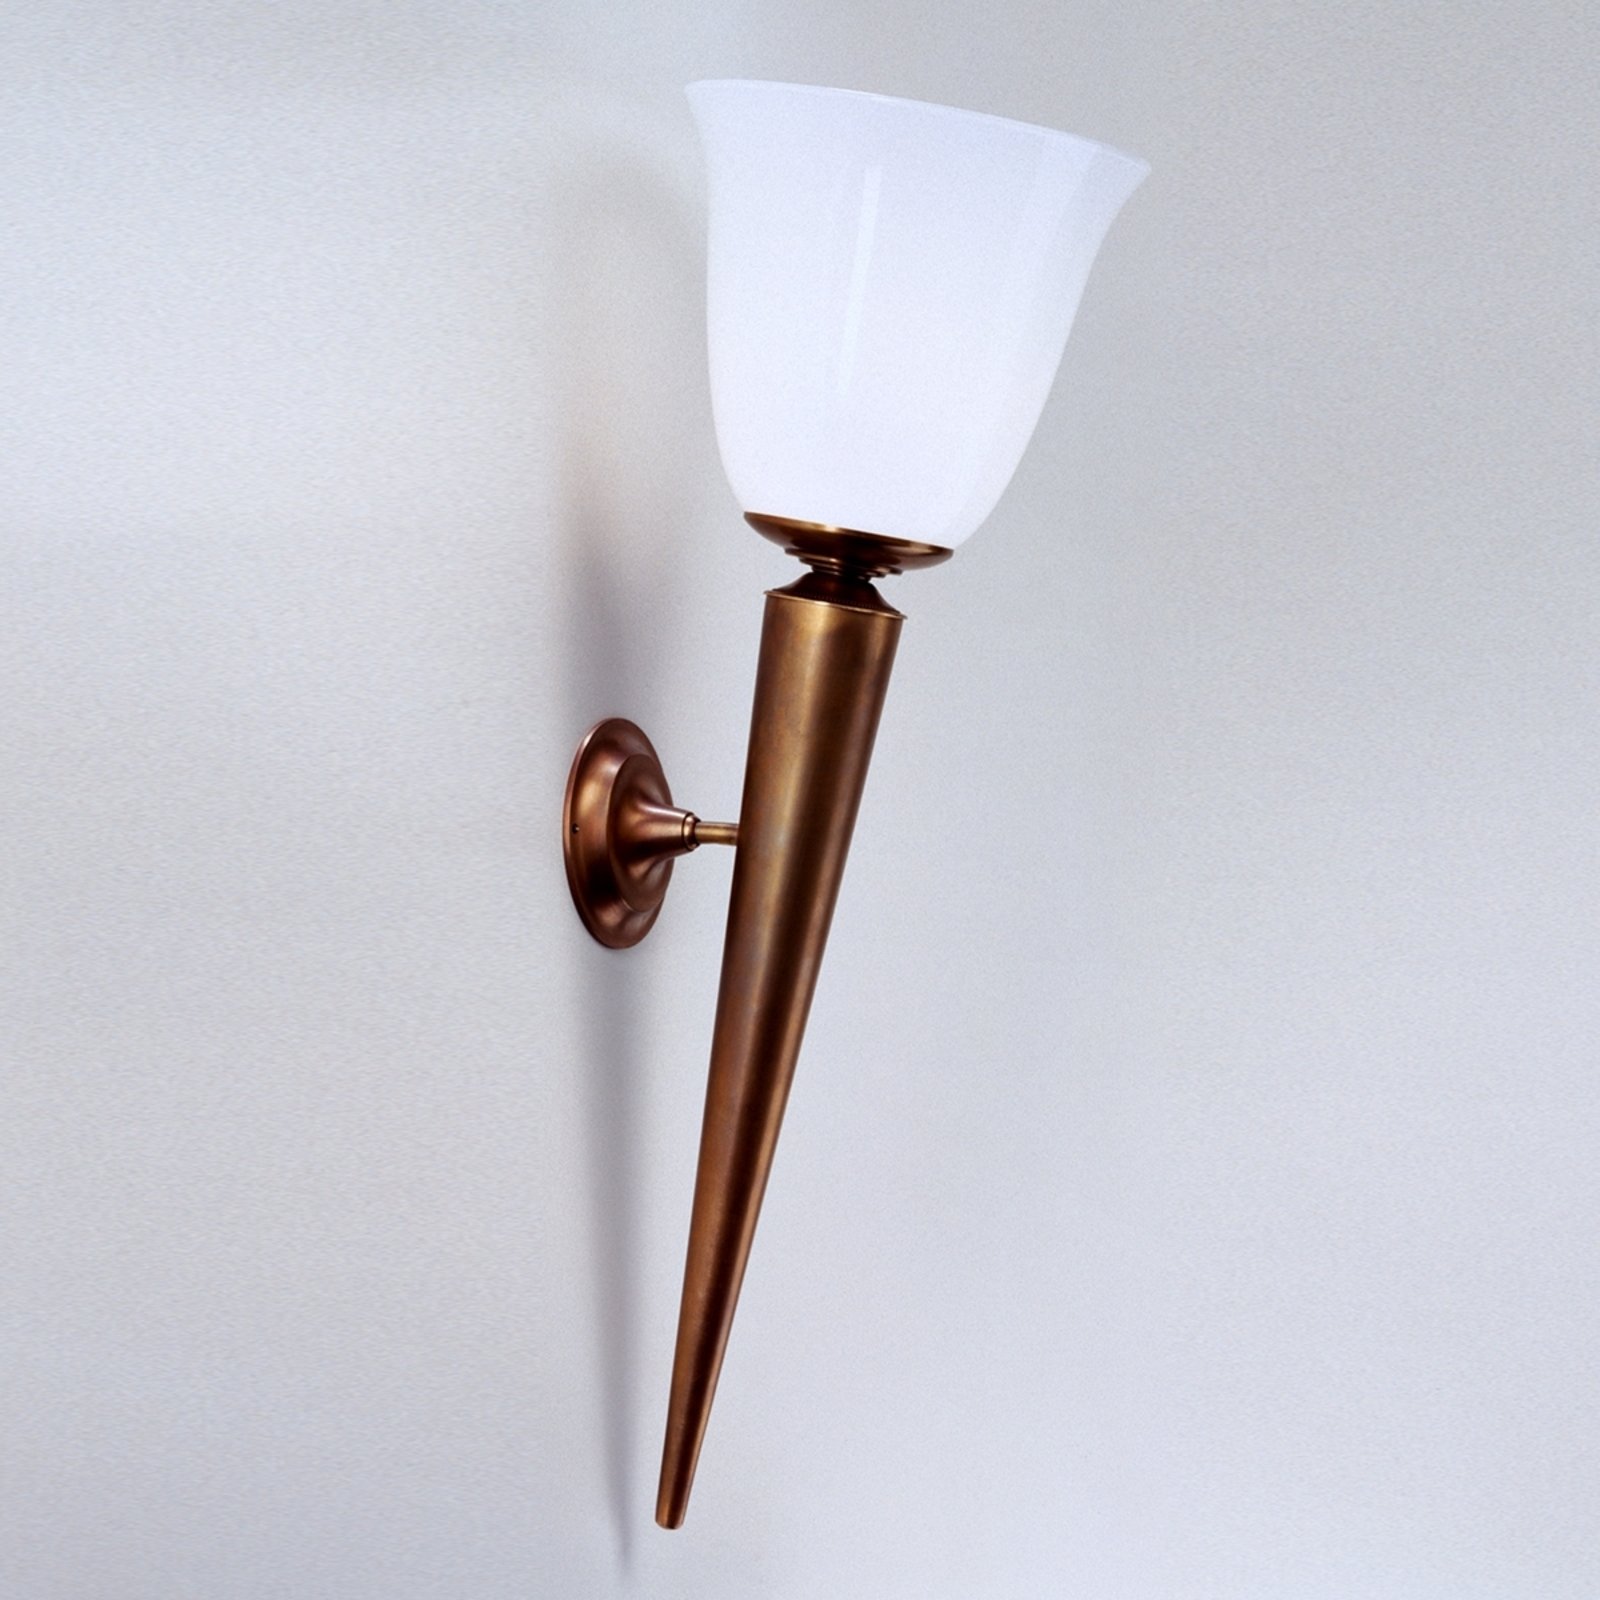 WILLI wall torch made of brass